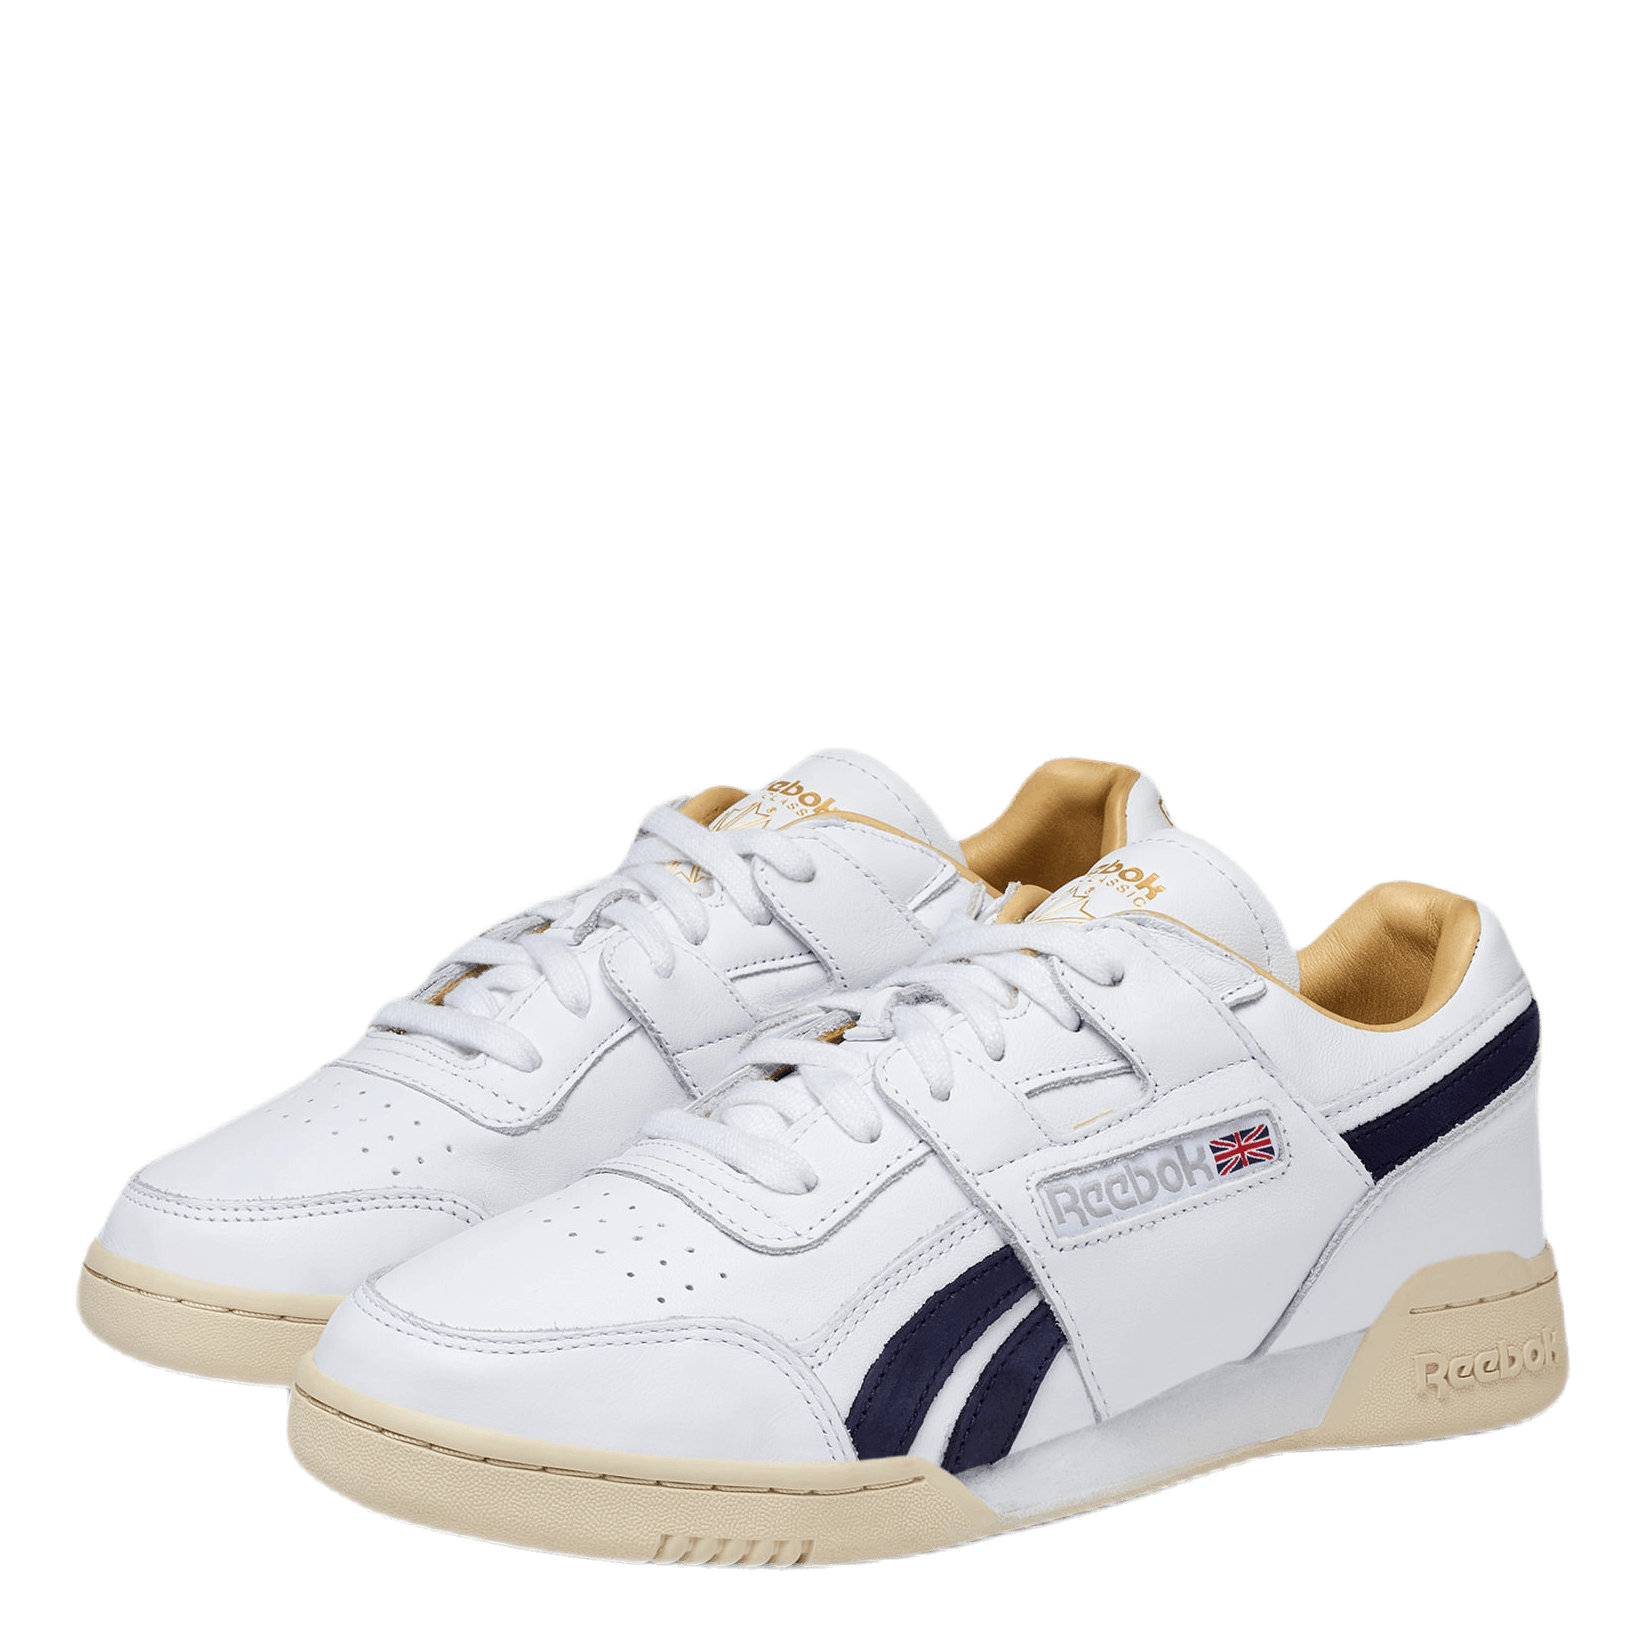 Reebok Mens Classics Cl Leather Mu Shoes (Chalk, Collegiate Navy, White) in  Pune at best price by Surya Import Export - Justdial